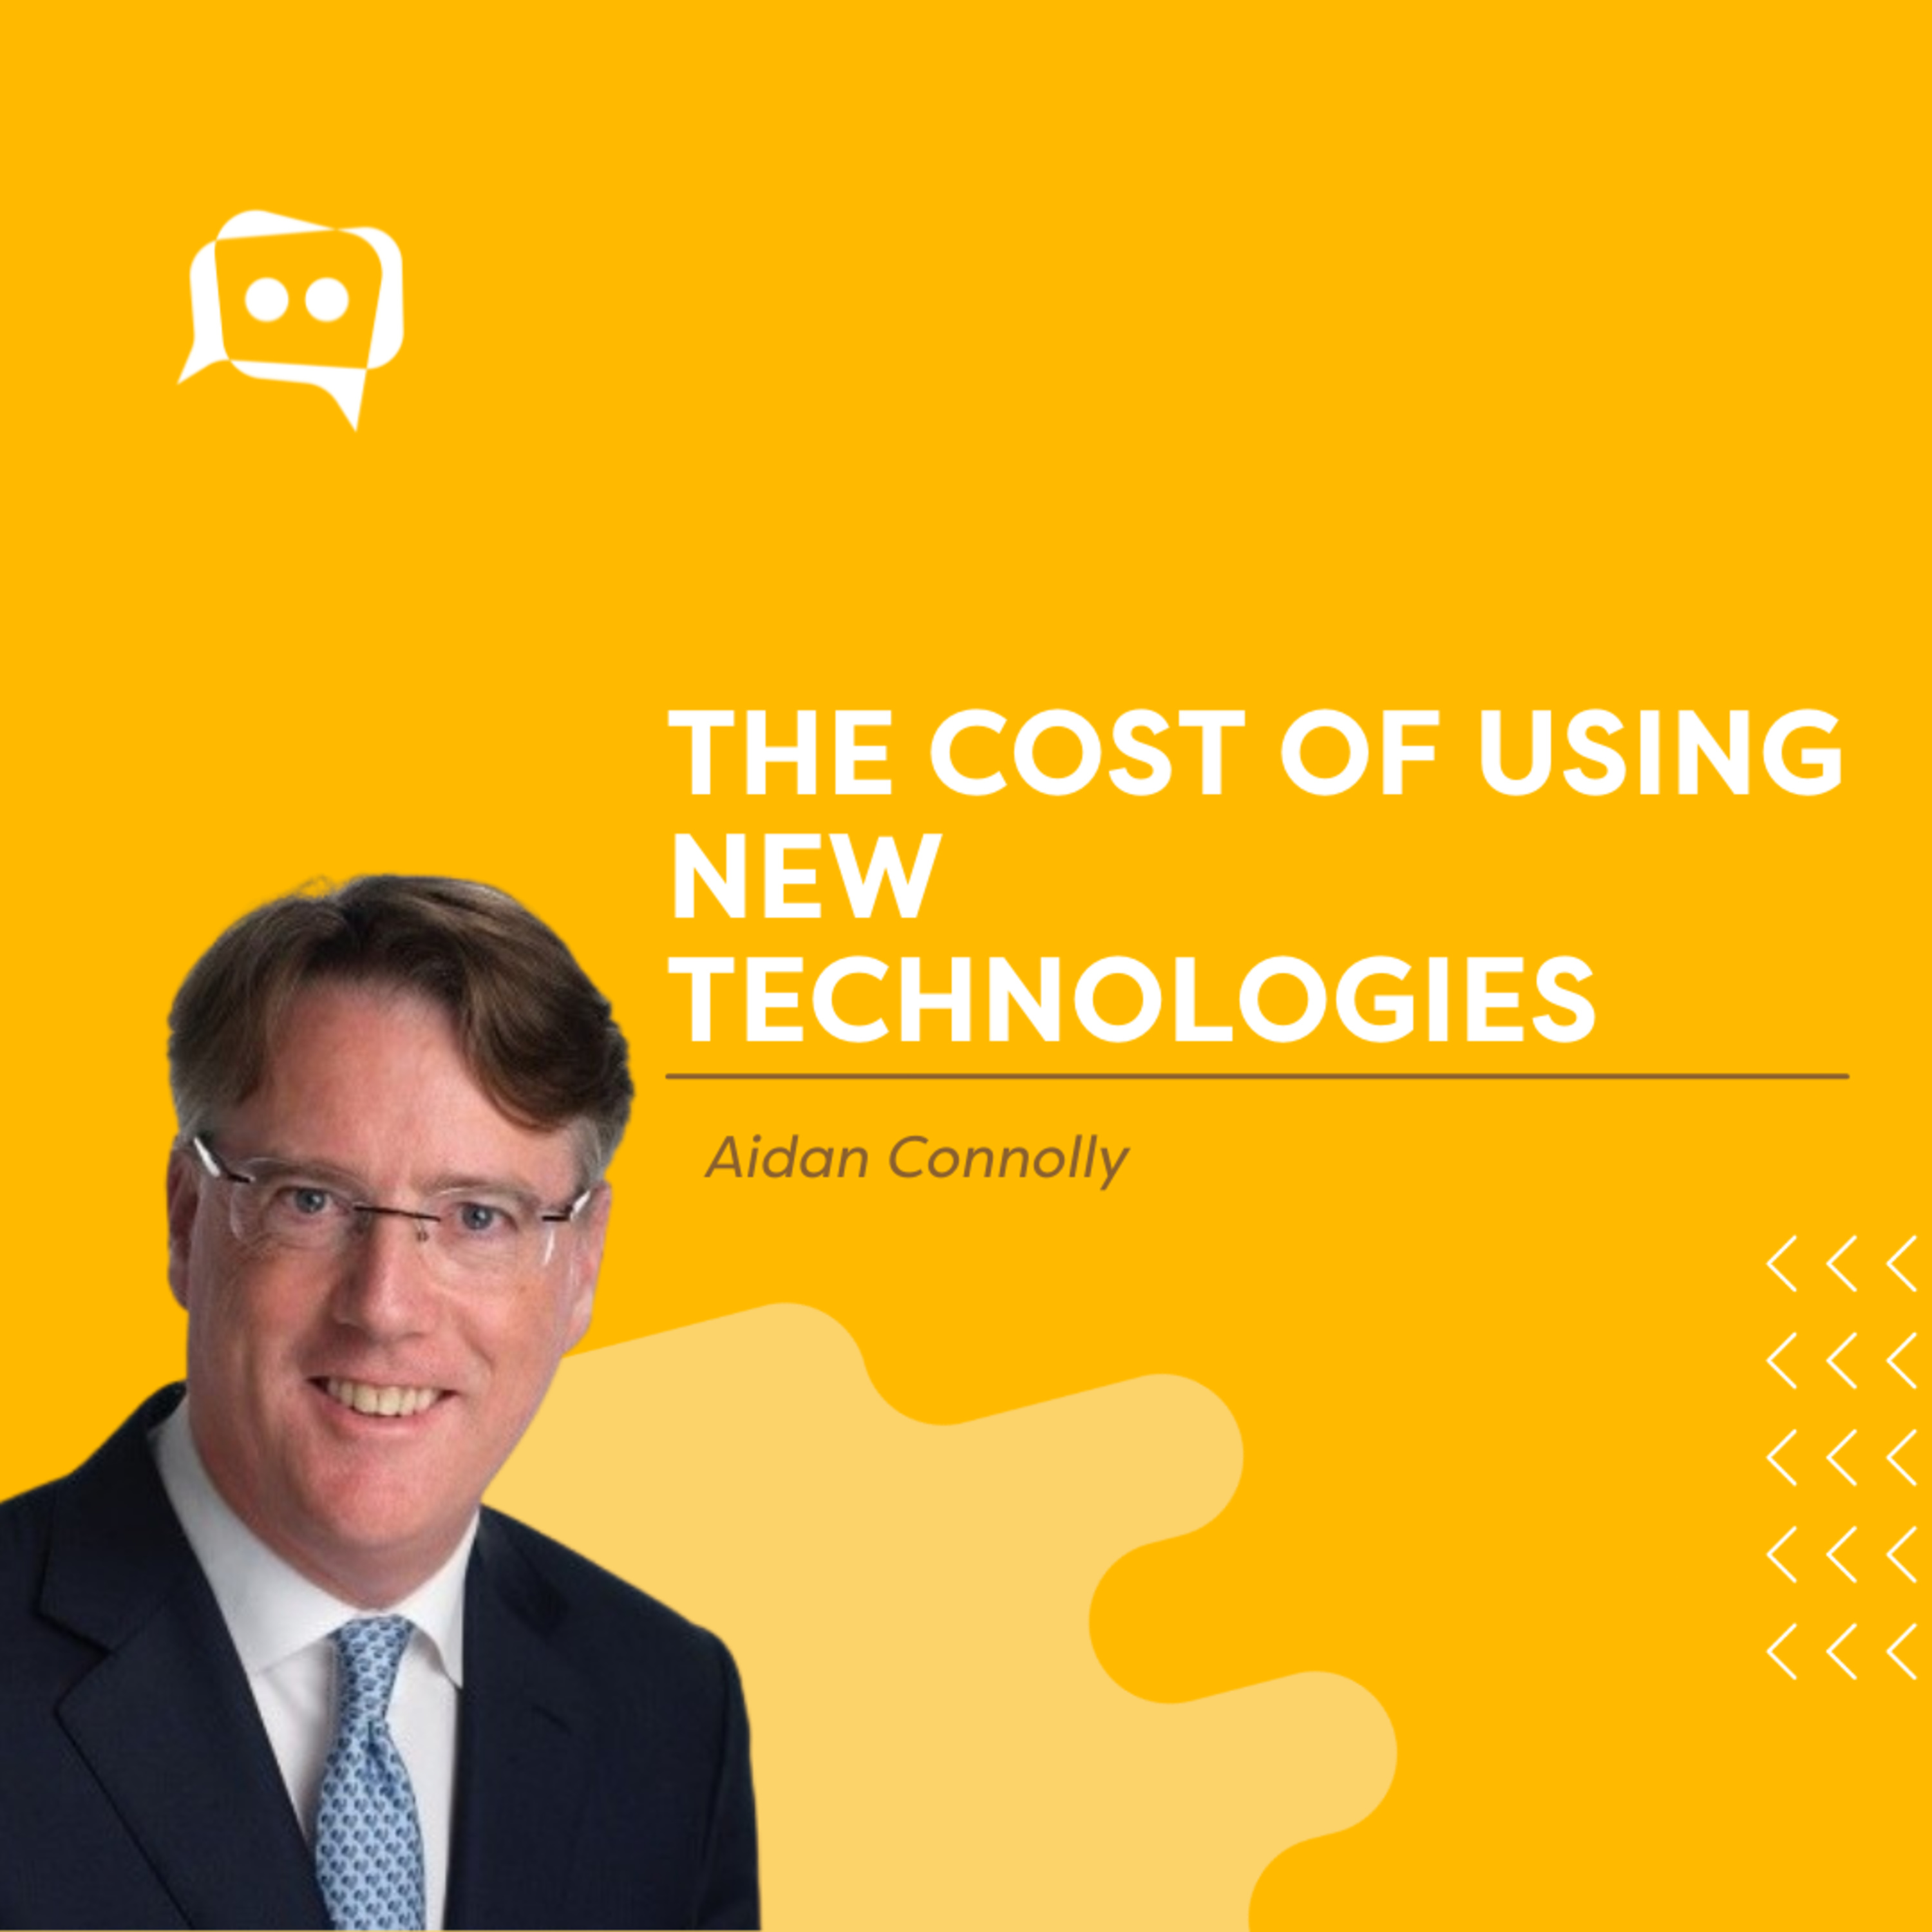 #SHORTS: The cost of using new technologies, with Aidan Connolly